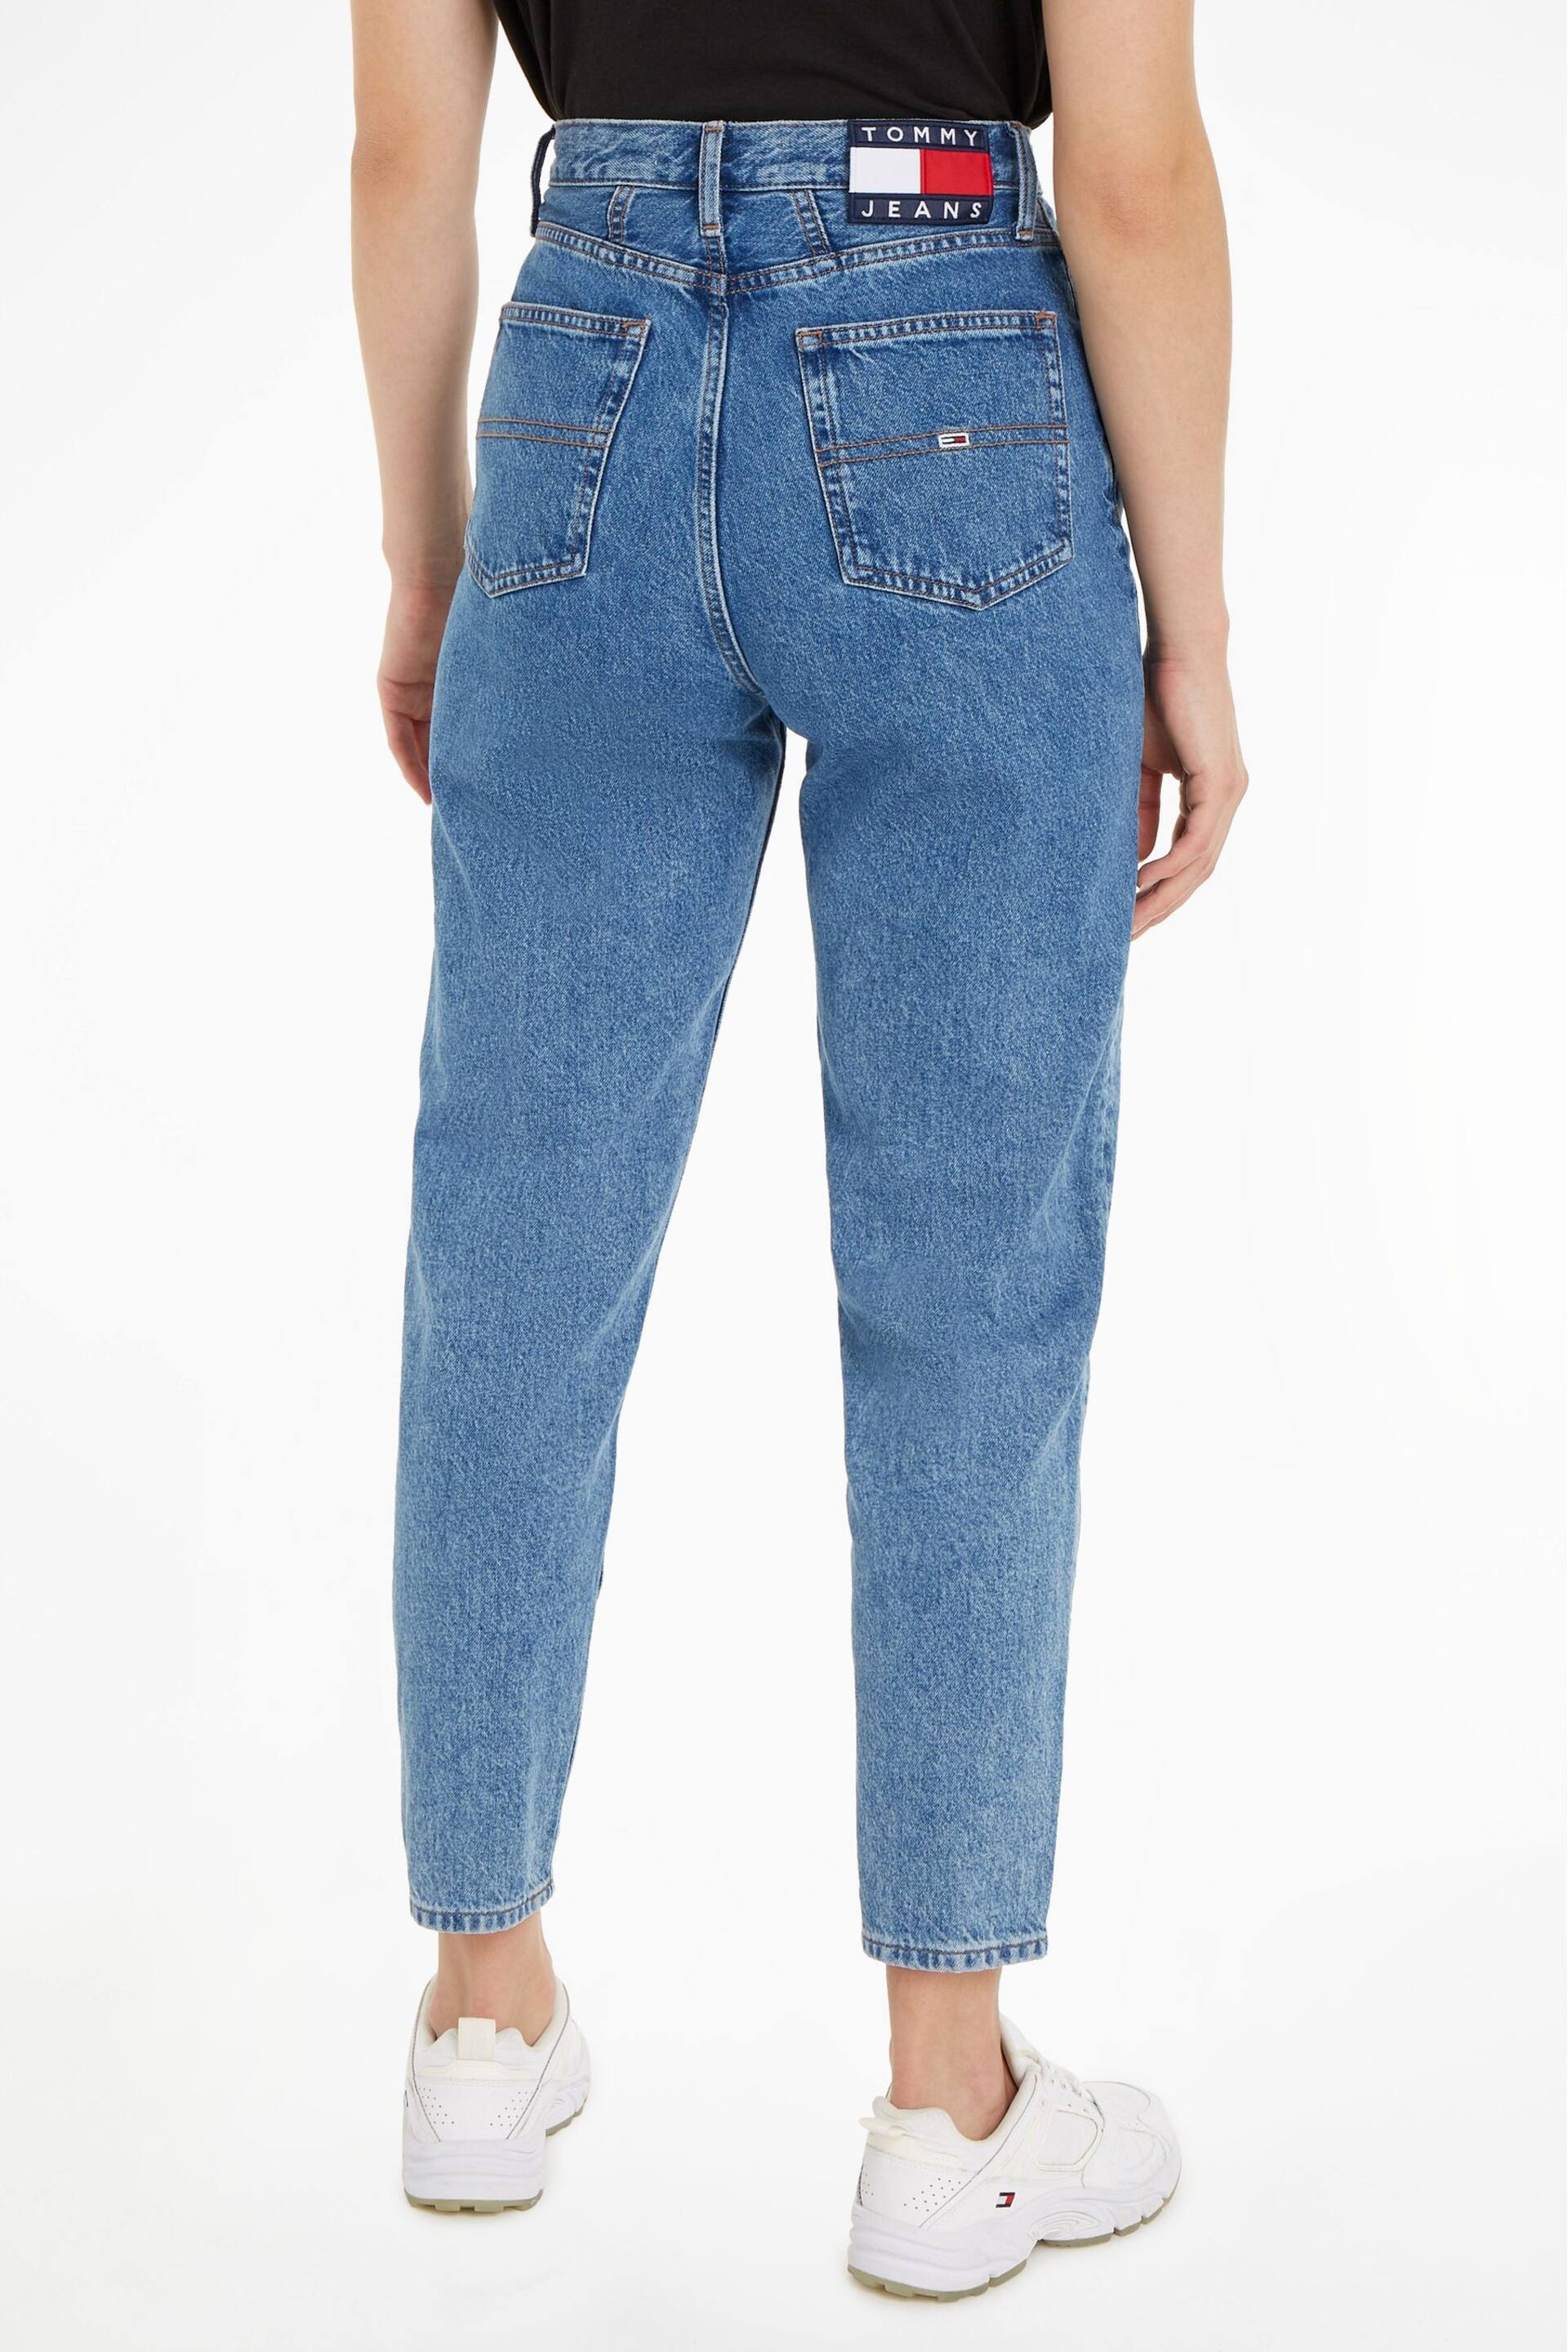 Tommy Jeans Blue Ultra High Rise Tapered Mom Jeans - Image 2 of 11